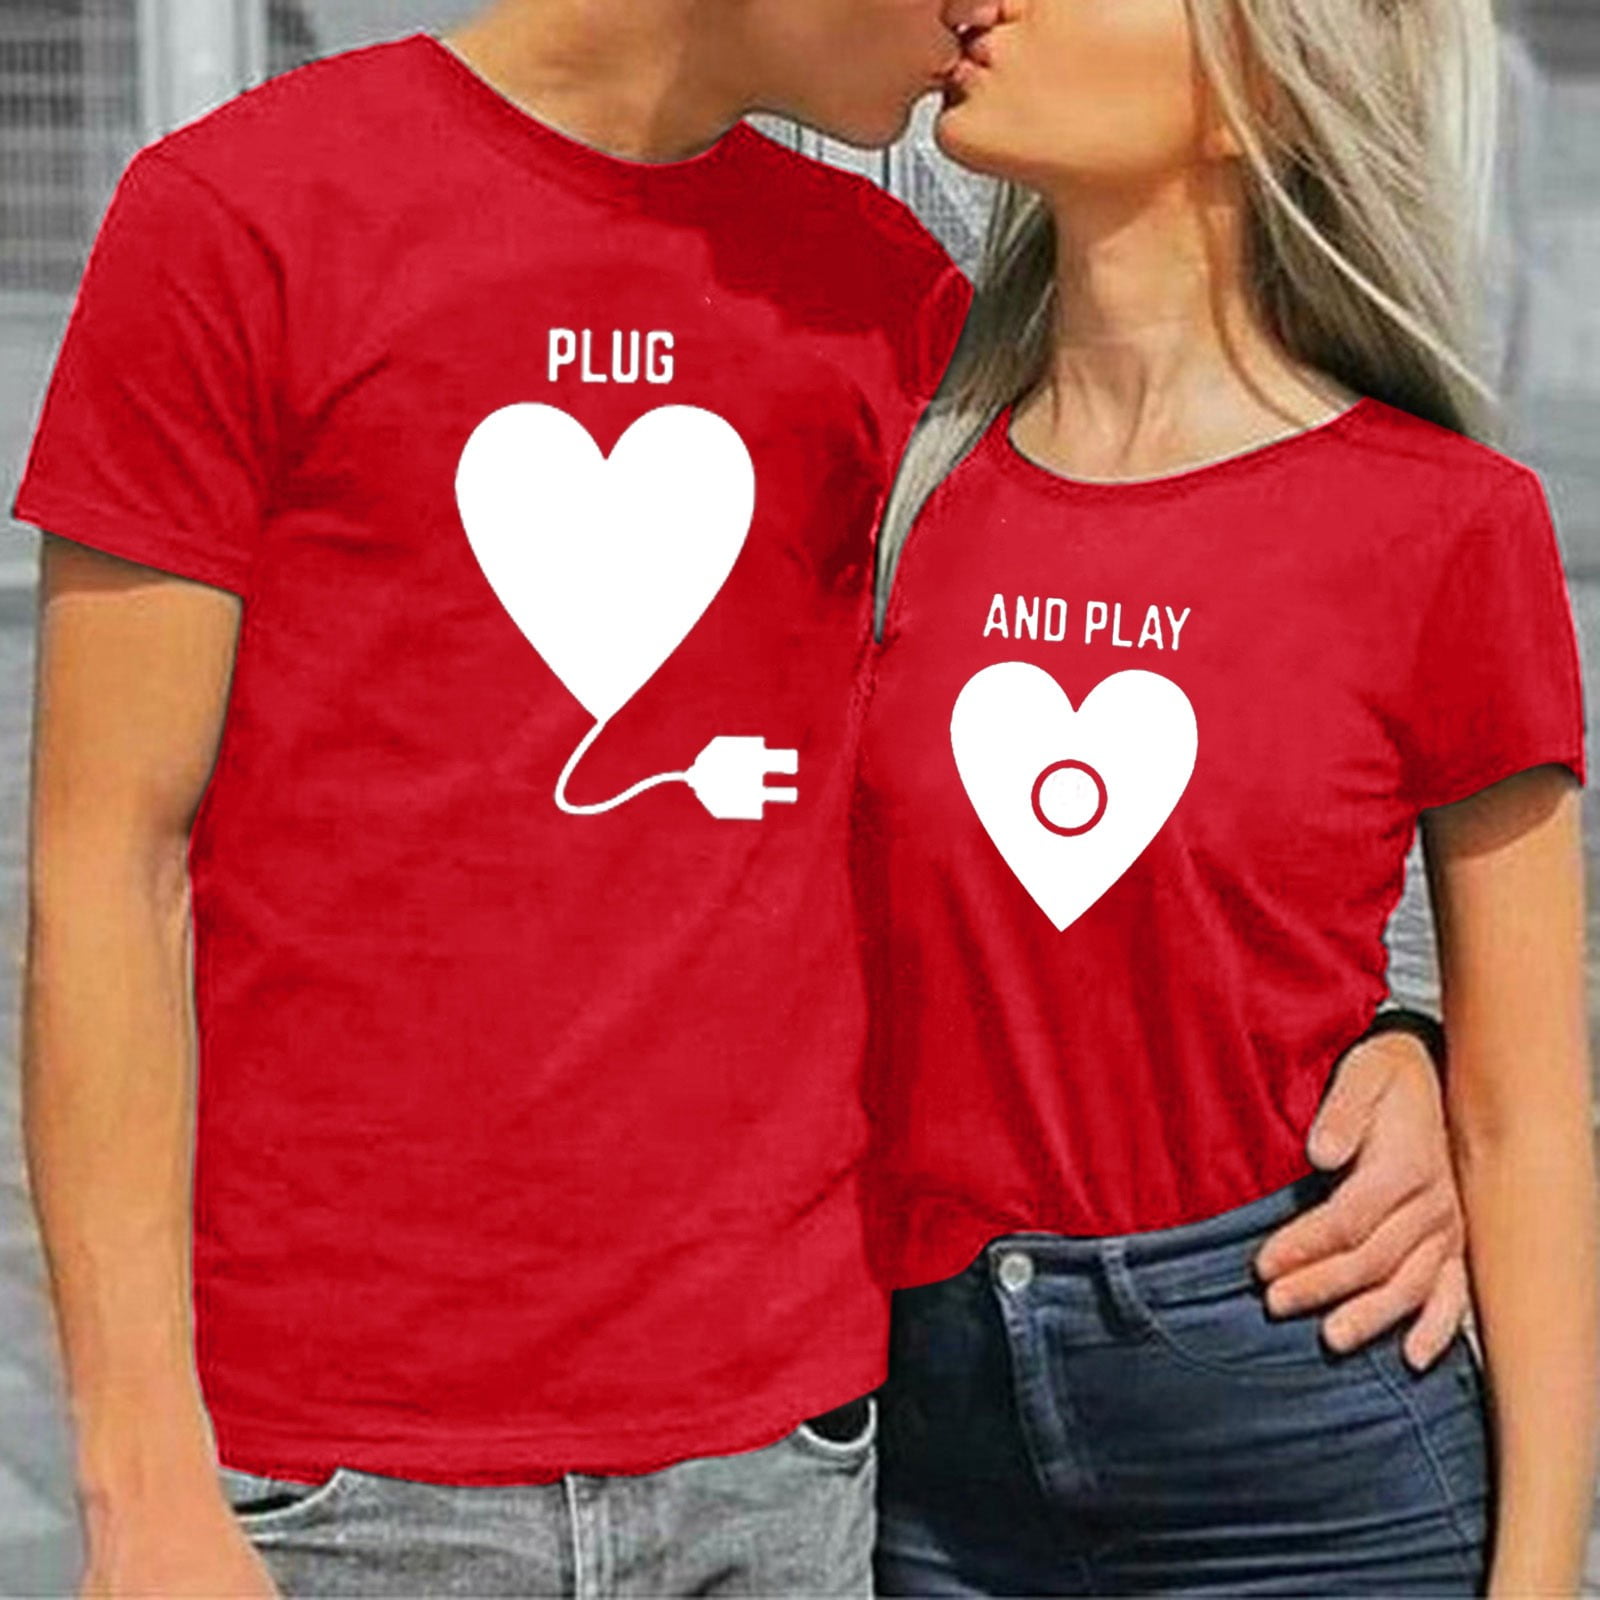 Red Heart Matching Couple Shirts Happy Valentines Day Couples 